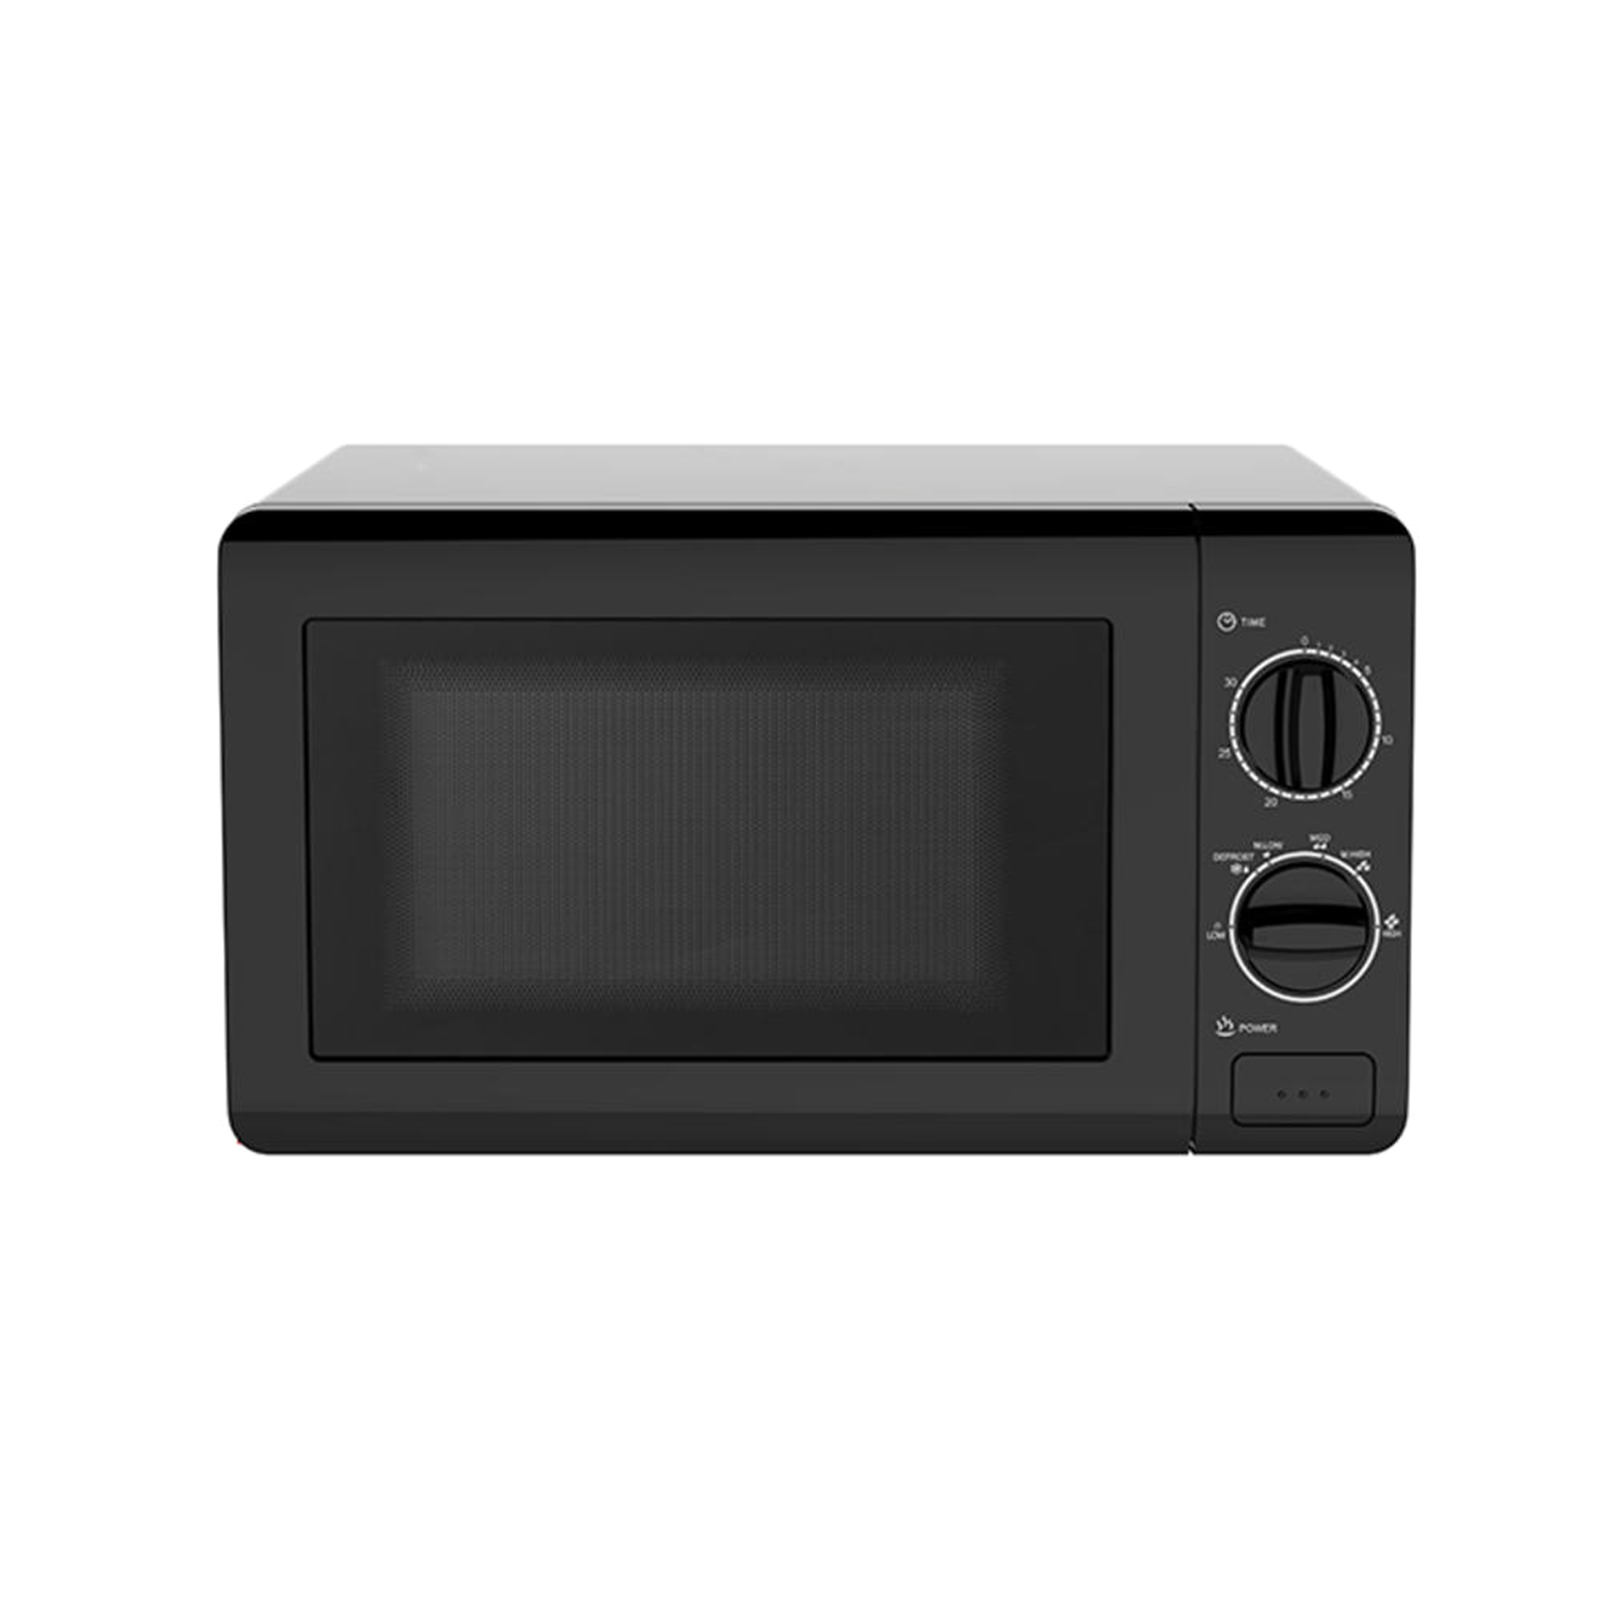 Photo 1 of **PARTS ONLY, DOES NOT TURN ON, SEE PHOTOS**
Avanti 0.7 CF Manual Microwave Oven- Black